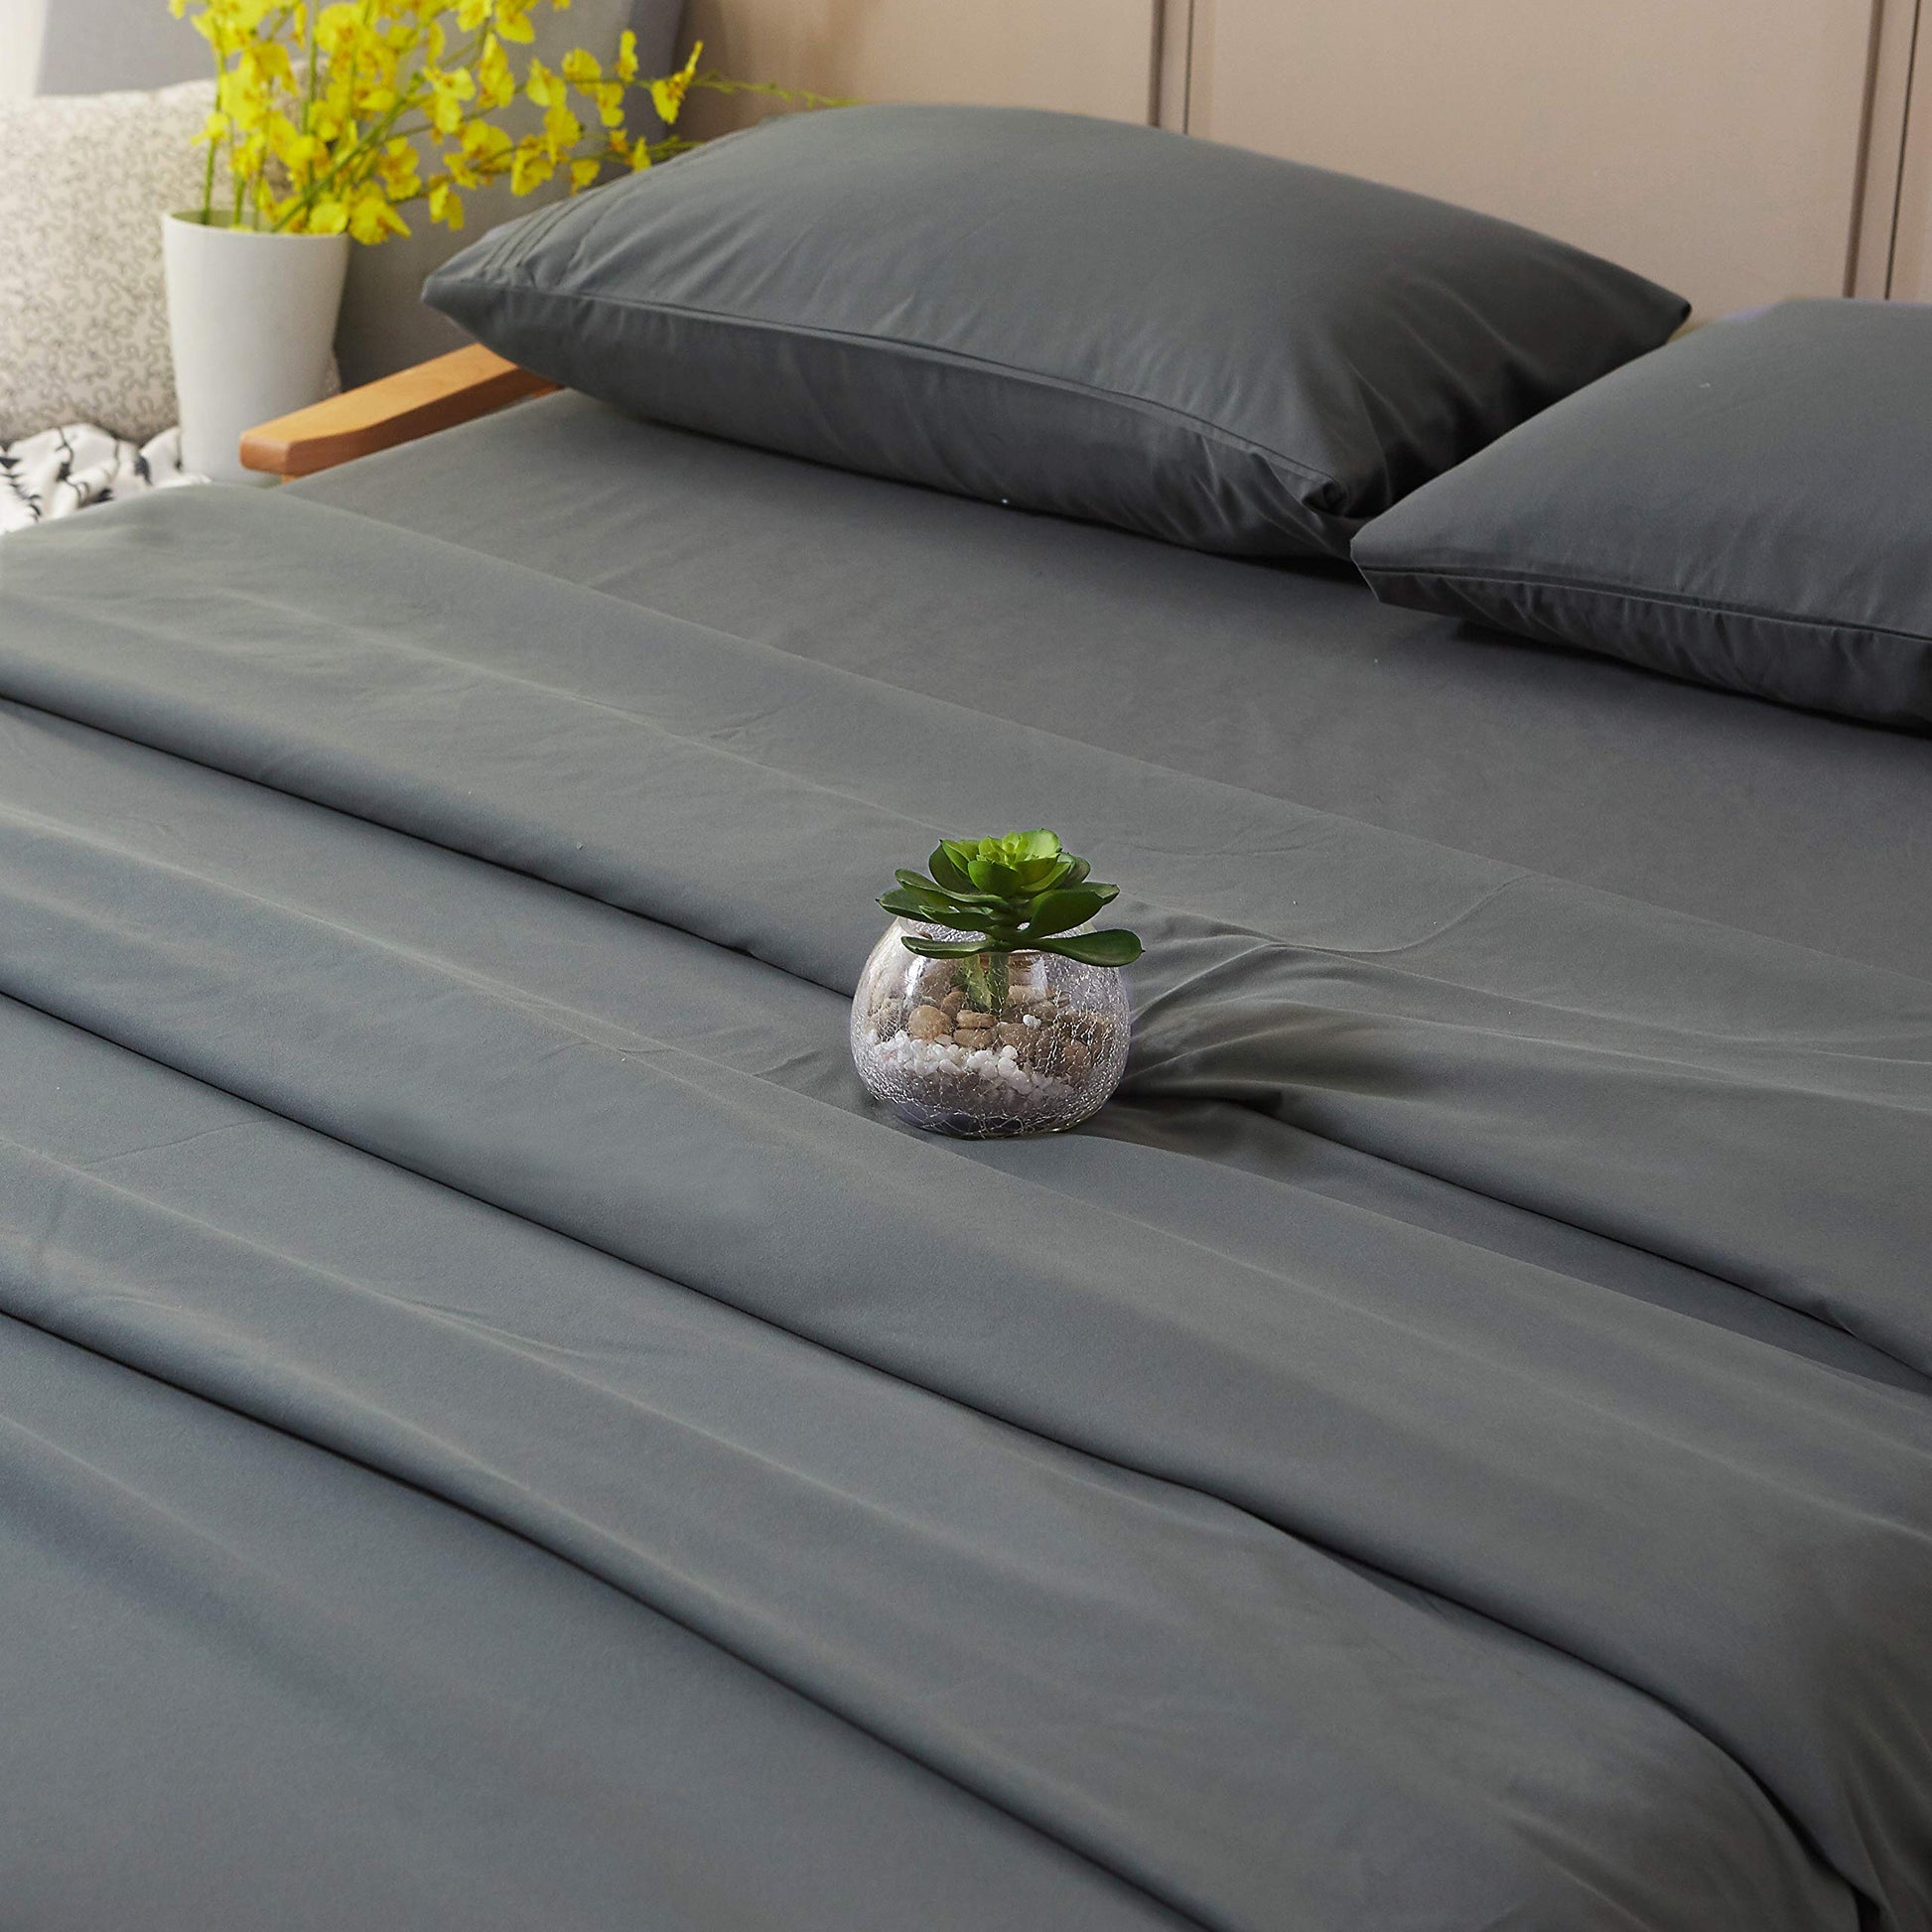 Lowest Price: Utopia Bedding Queen Bed Sheets Set